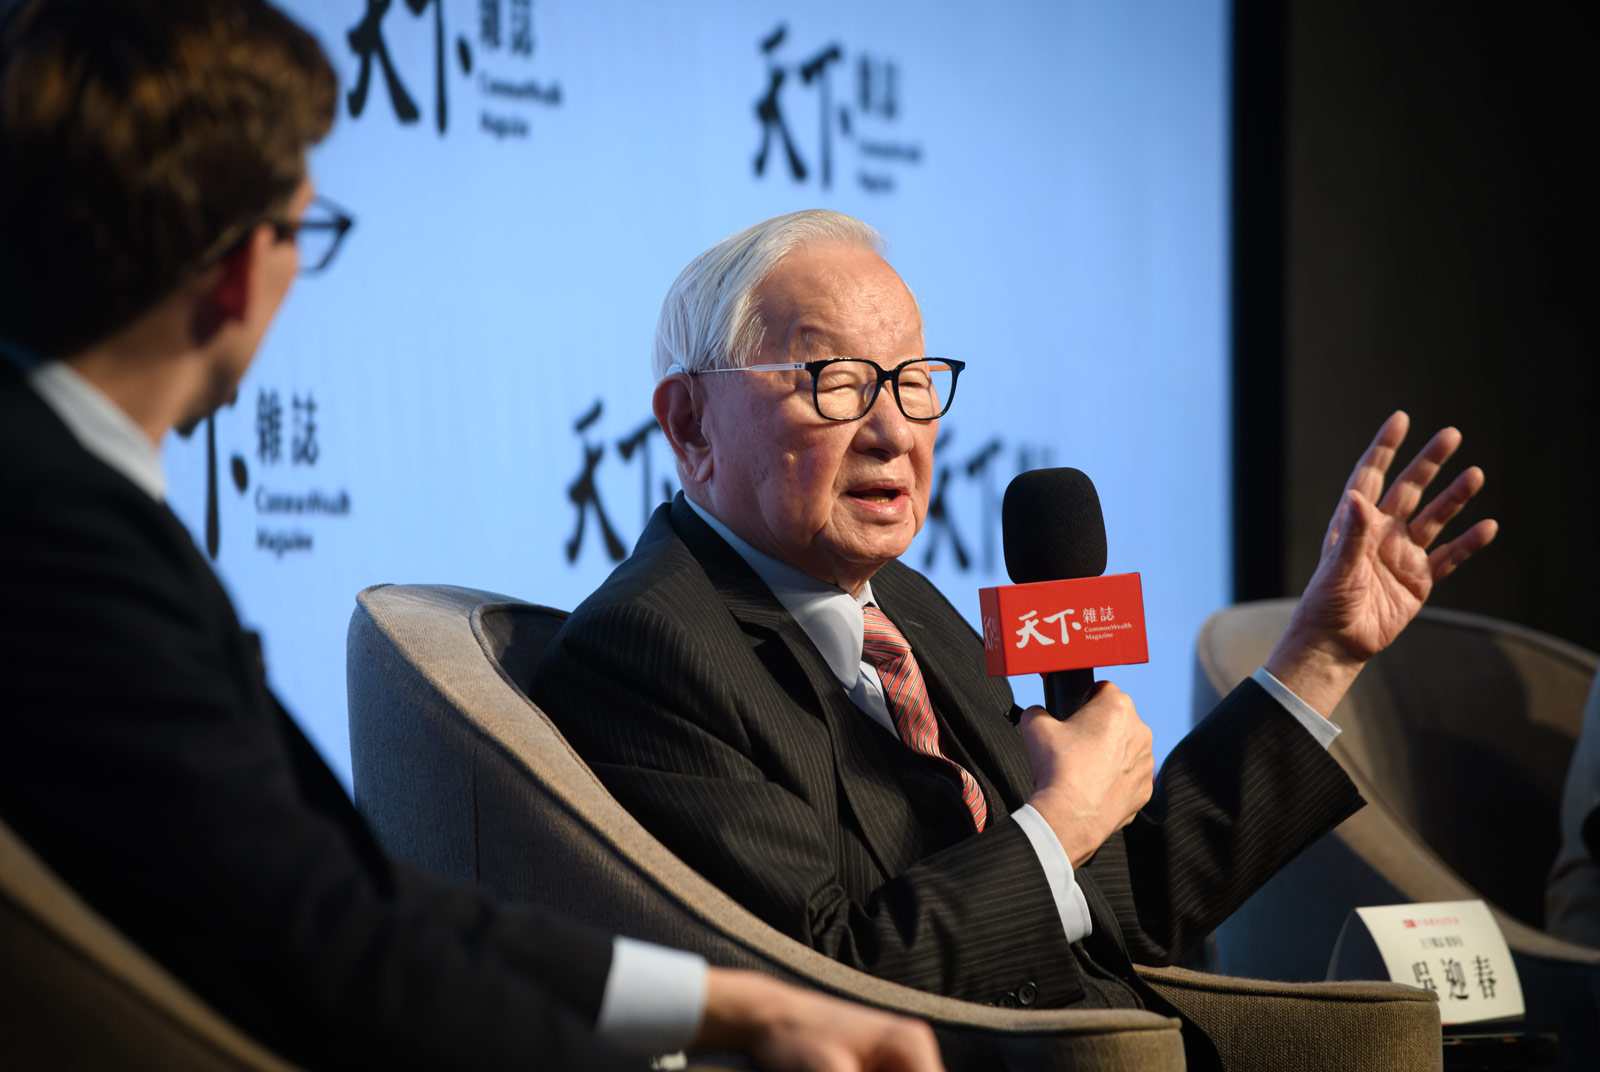 TSMC founder Morris Chang: Taiwan is indispensable in global chip industry